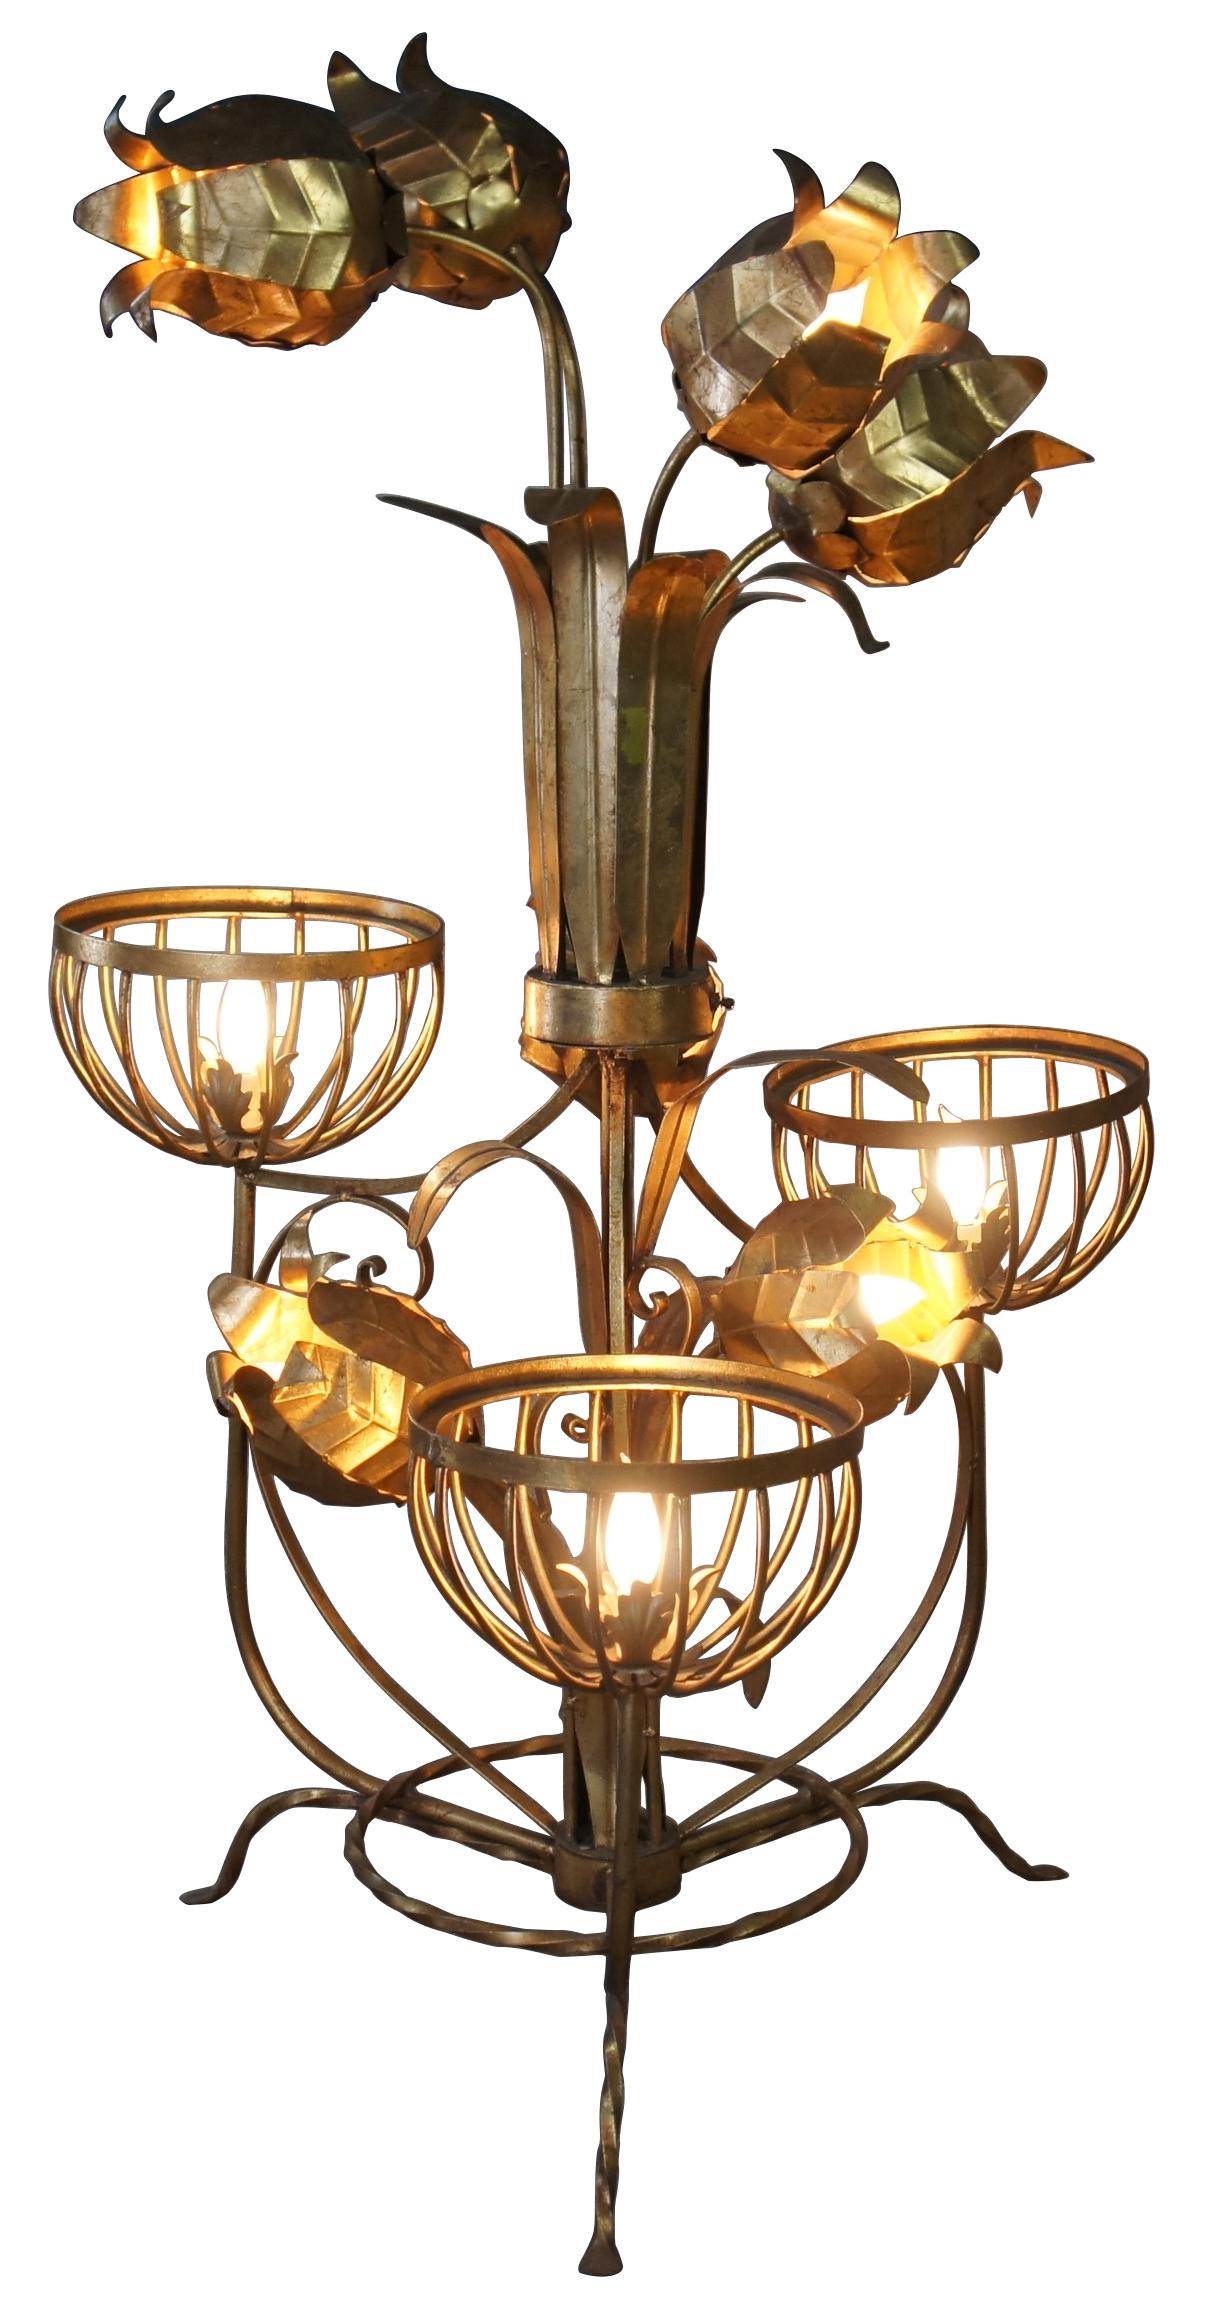 Monumental Regency style floor lamp. Made from tole and wrought iron with basket lamps and sculptural flowers over a tripod base. Includes 3 light settings. 

Globes would be 10